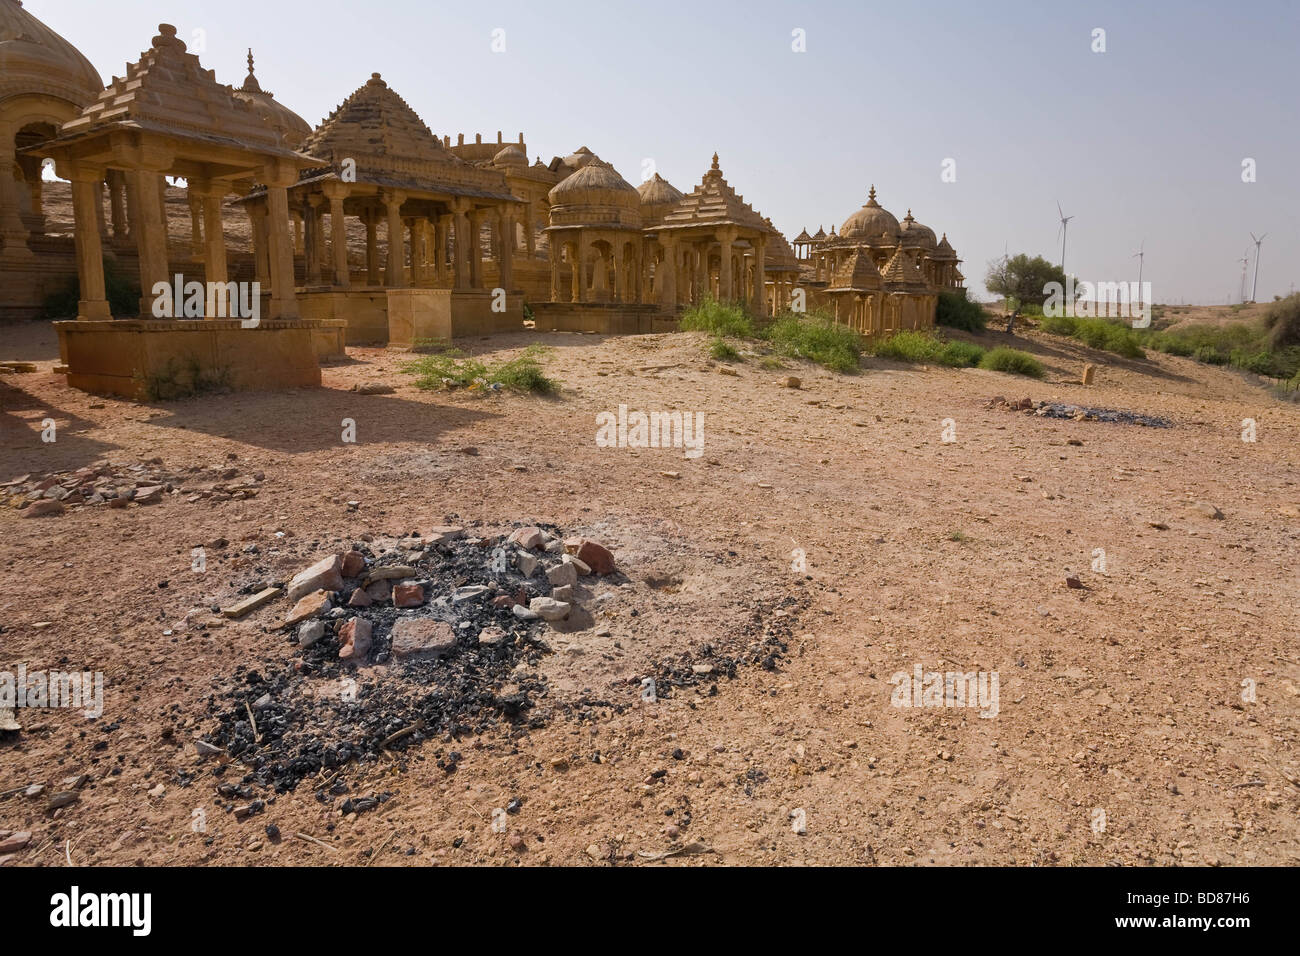 The remains of small fires in front of the memorials at Bada Bagh near Jaisalmer Stock Photo